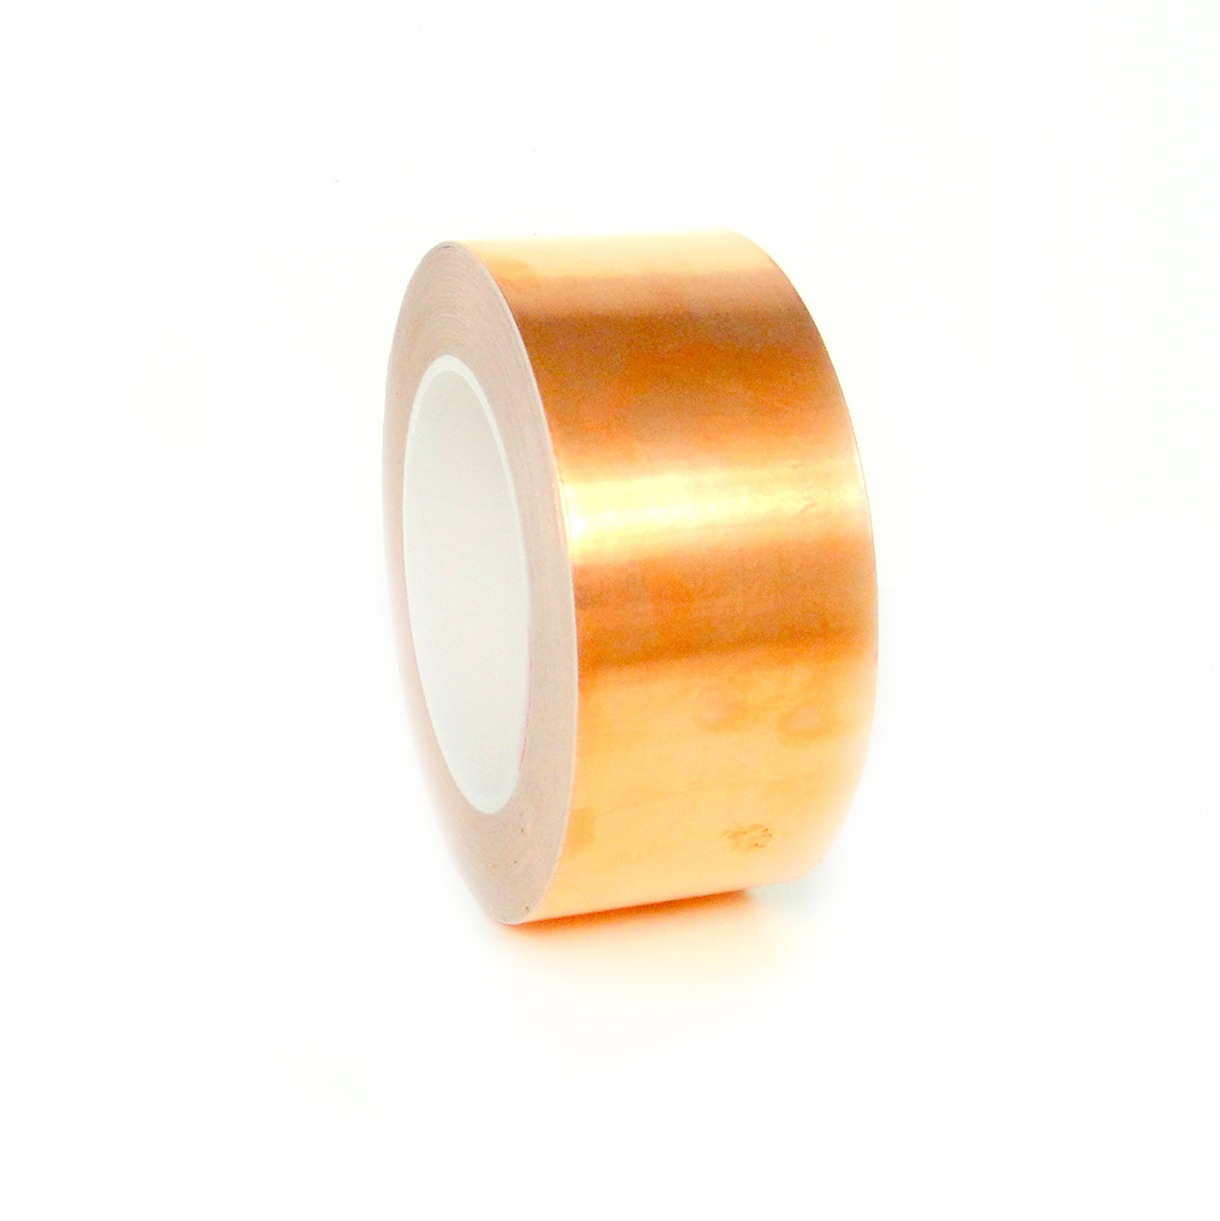 Foil Tape 3 Mil - Self Wound without Liner (46030) - Tape Depot